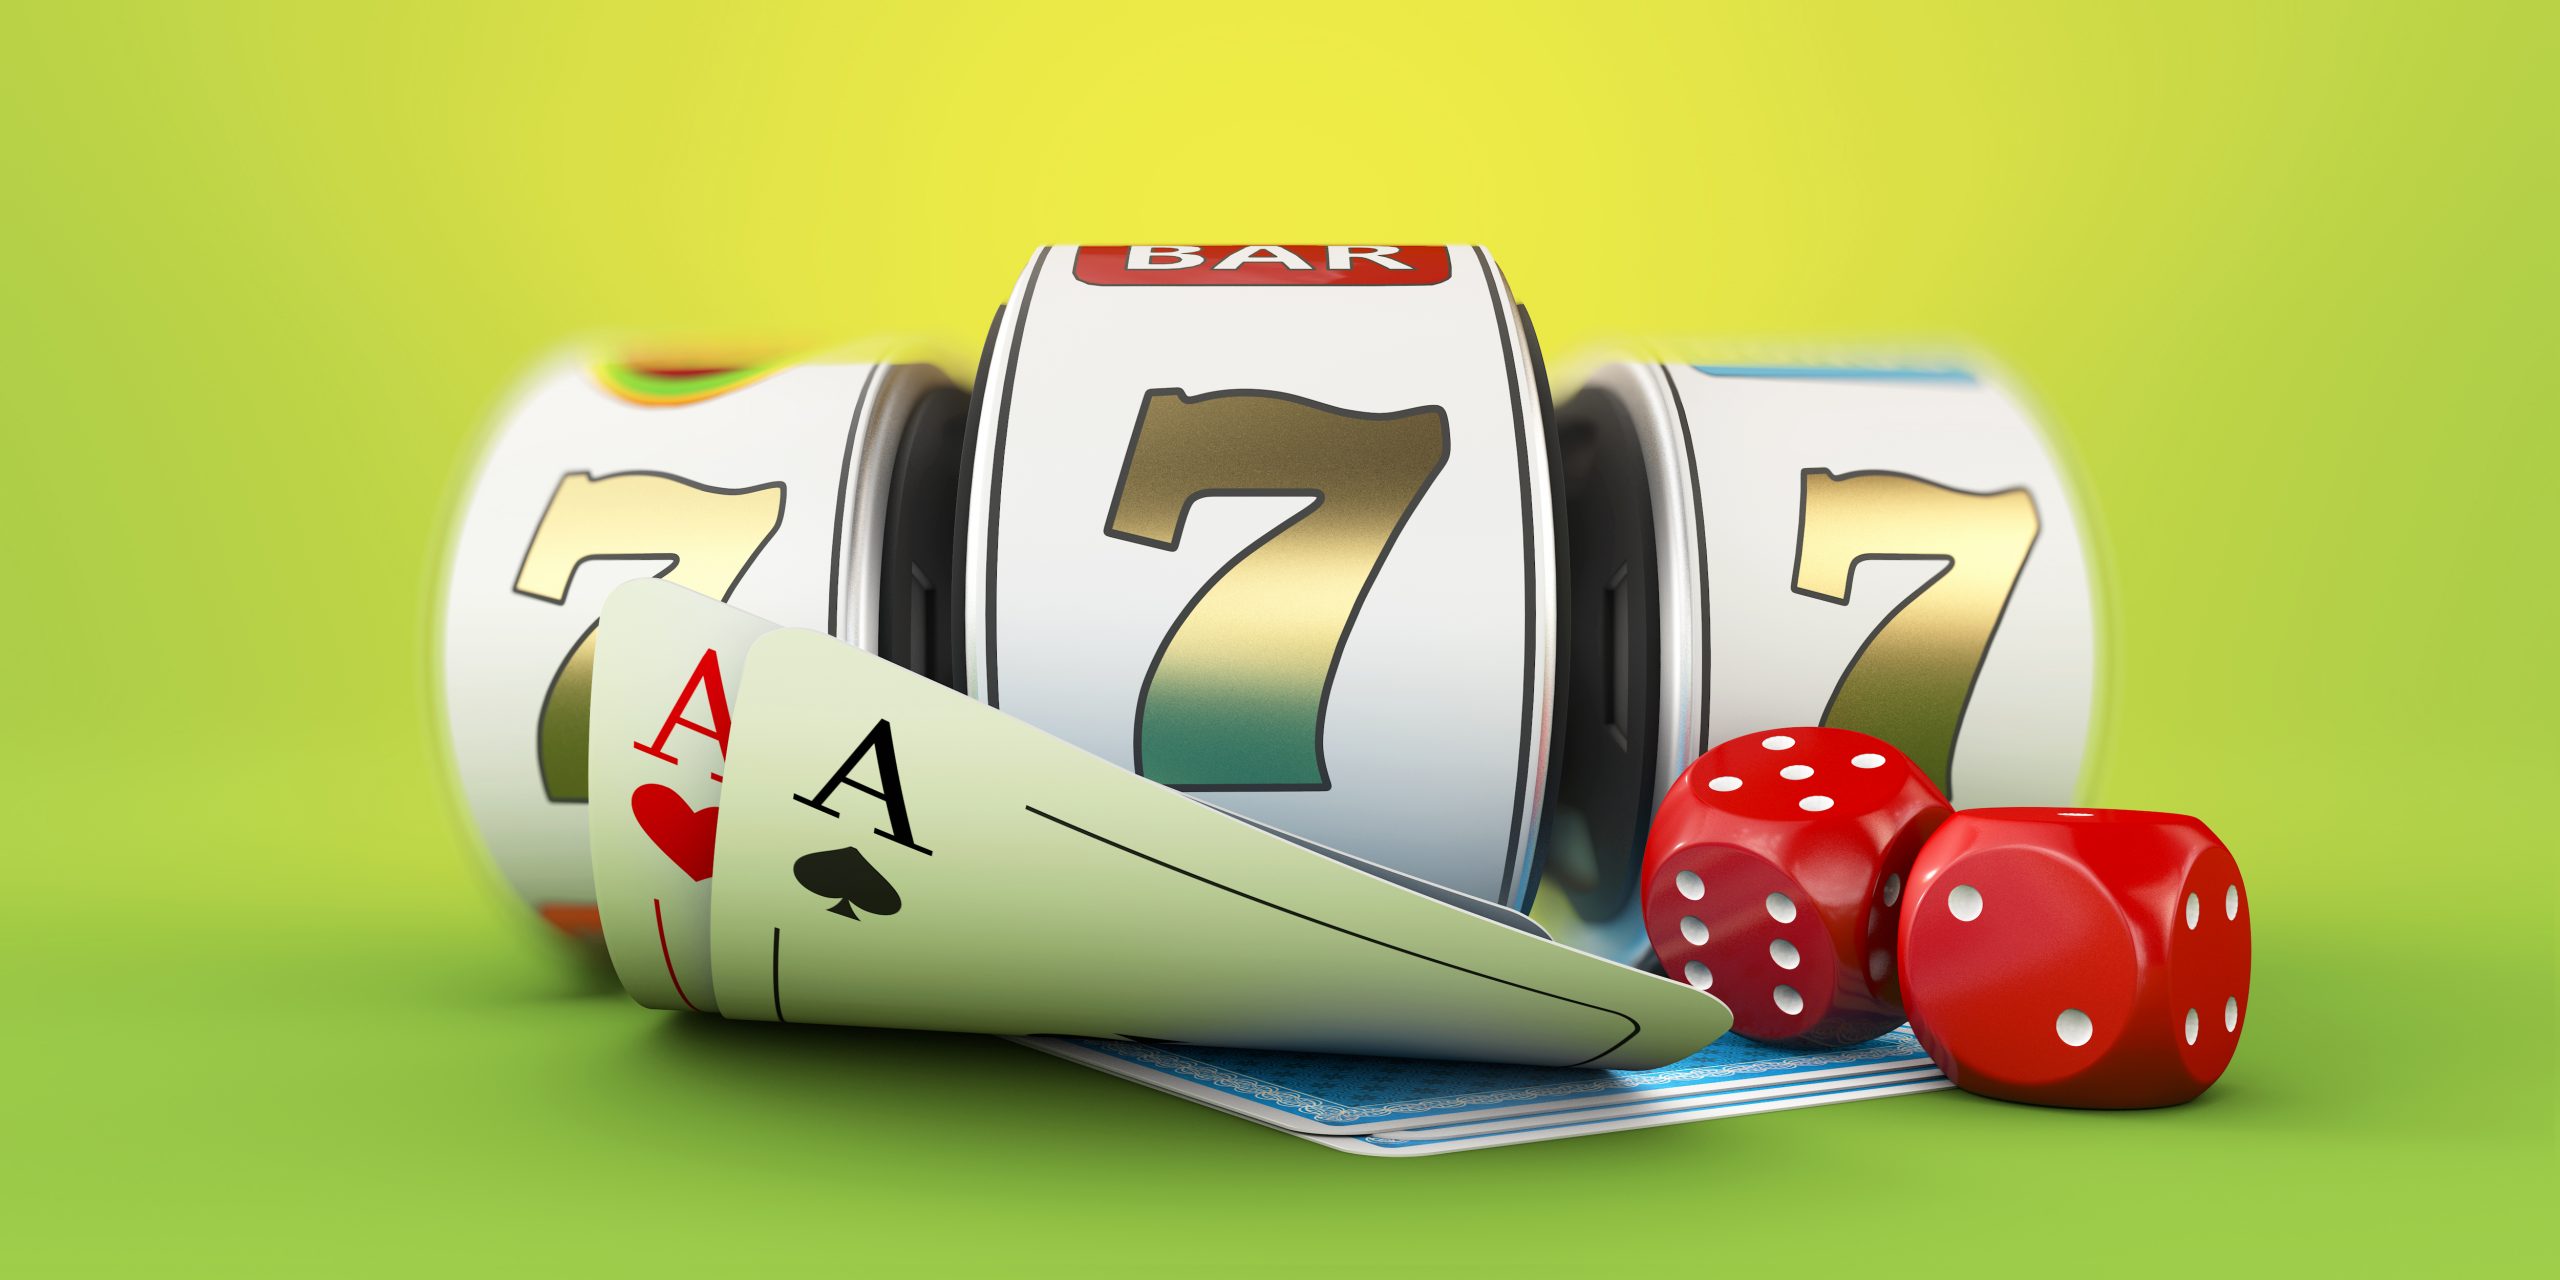 slot machine with lucky sevens jackpot dace clipping path included 3d rendering scaled Almanbahis Giriş